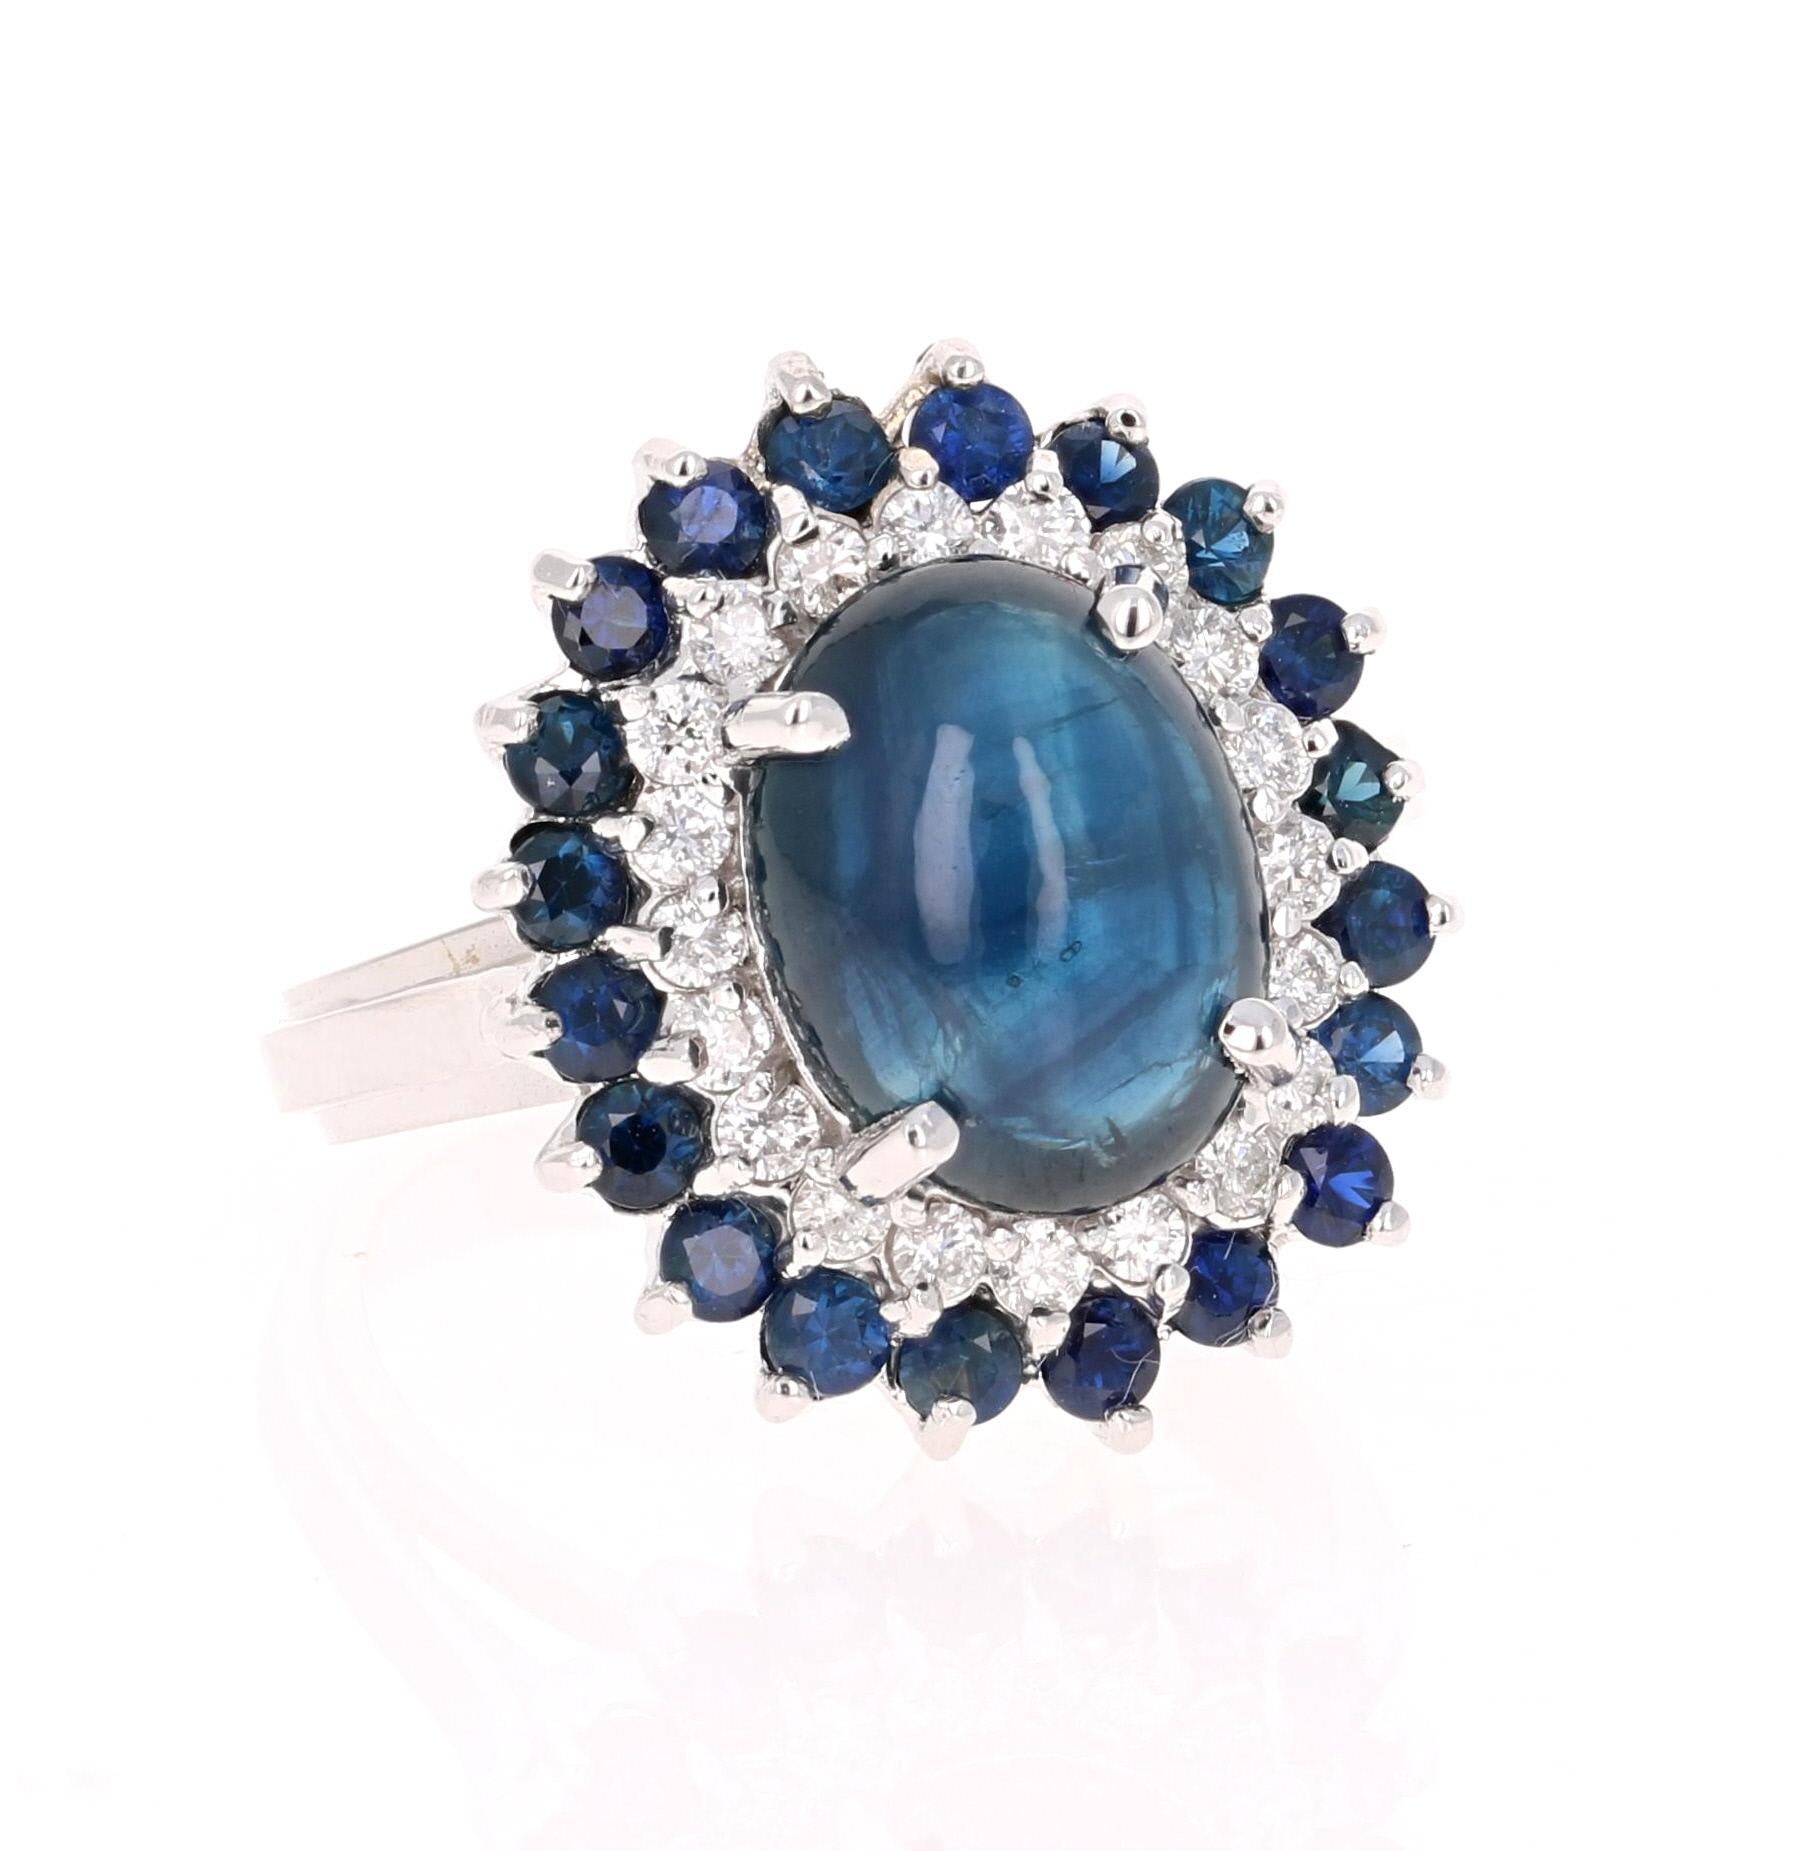 Beautiful and Charming Cabochon Cut Sapphire Diamond Ring! This ring has a stunning Oval Cabochon Cut Blue Sapphire that weighs 5.20 carats. The Sapphire is surrounded by 20 Round Cut Diamonds that weigh 0.36 carats (Clarity: SI, Color: F) and also